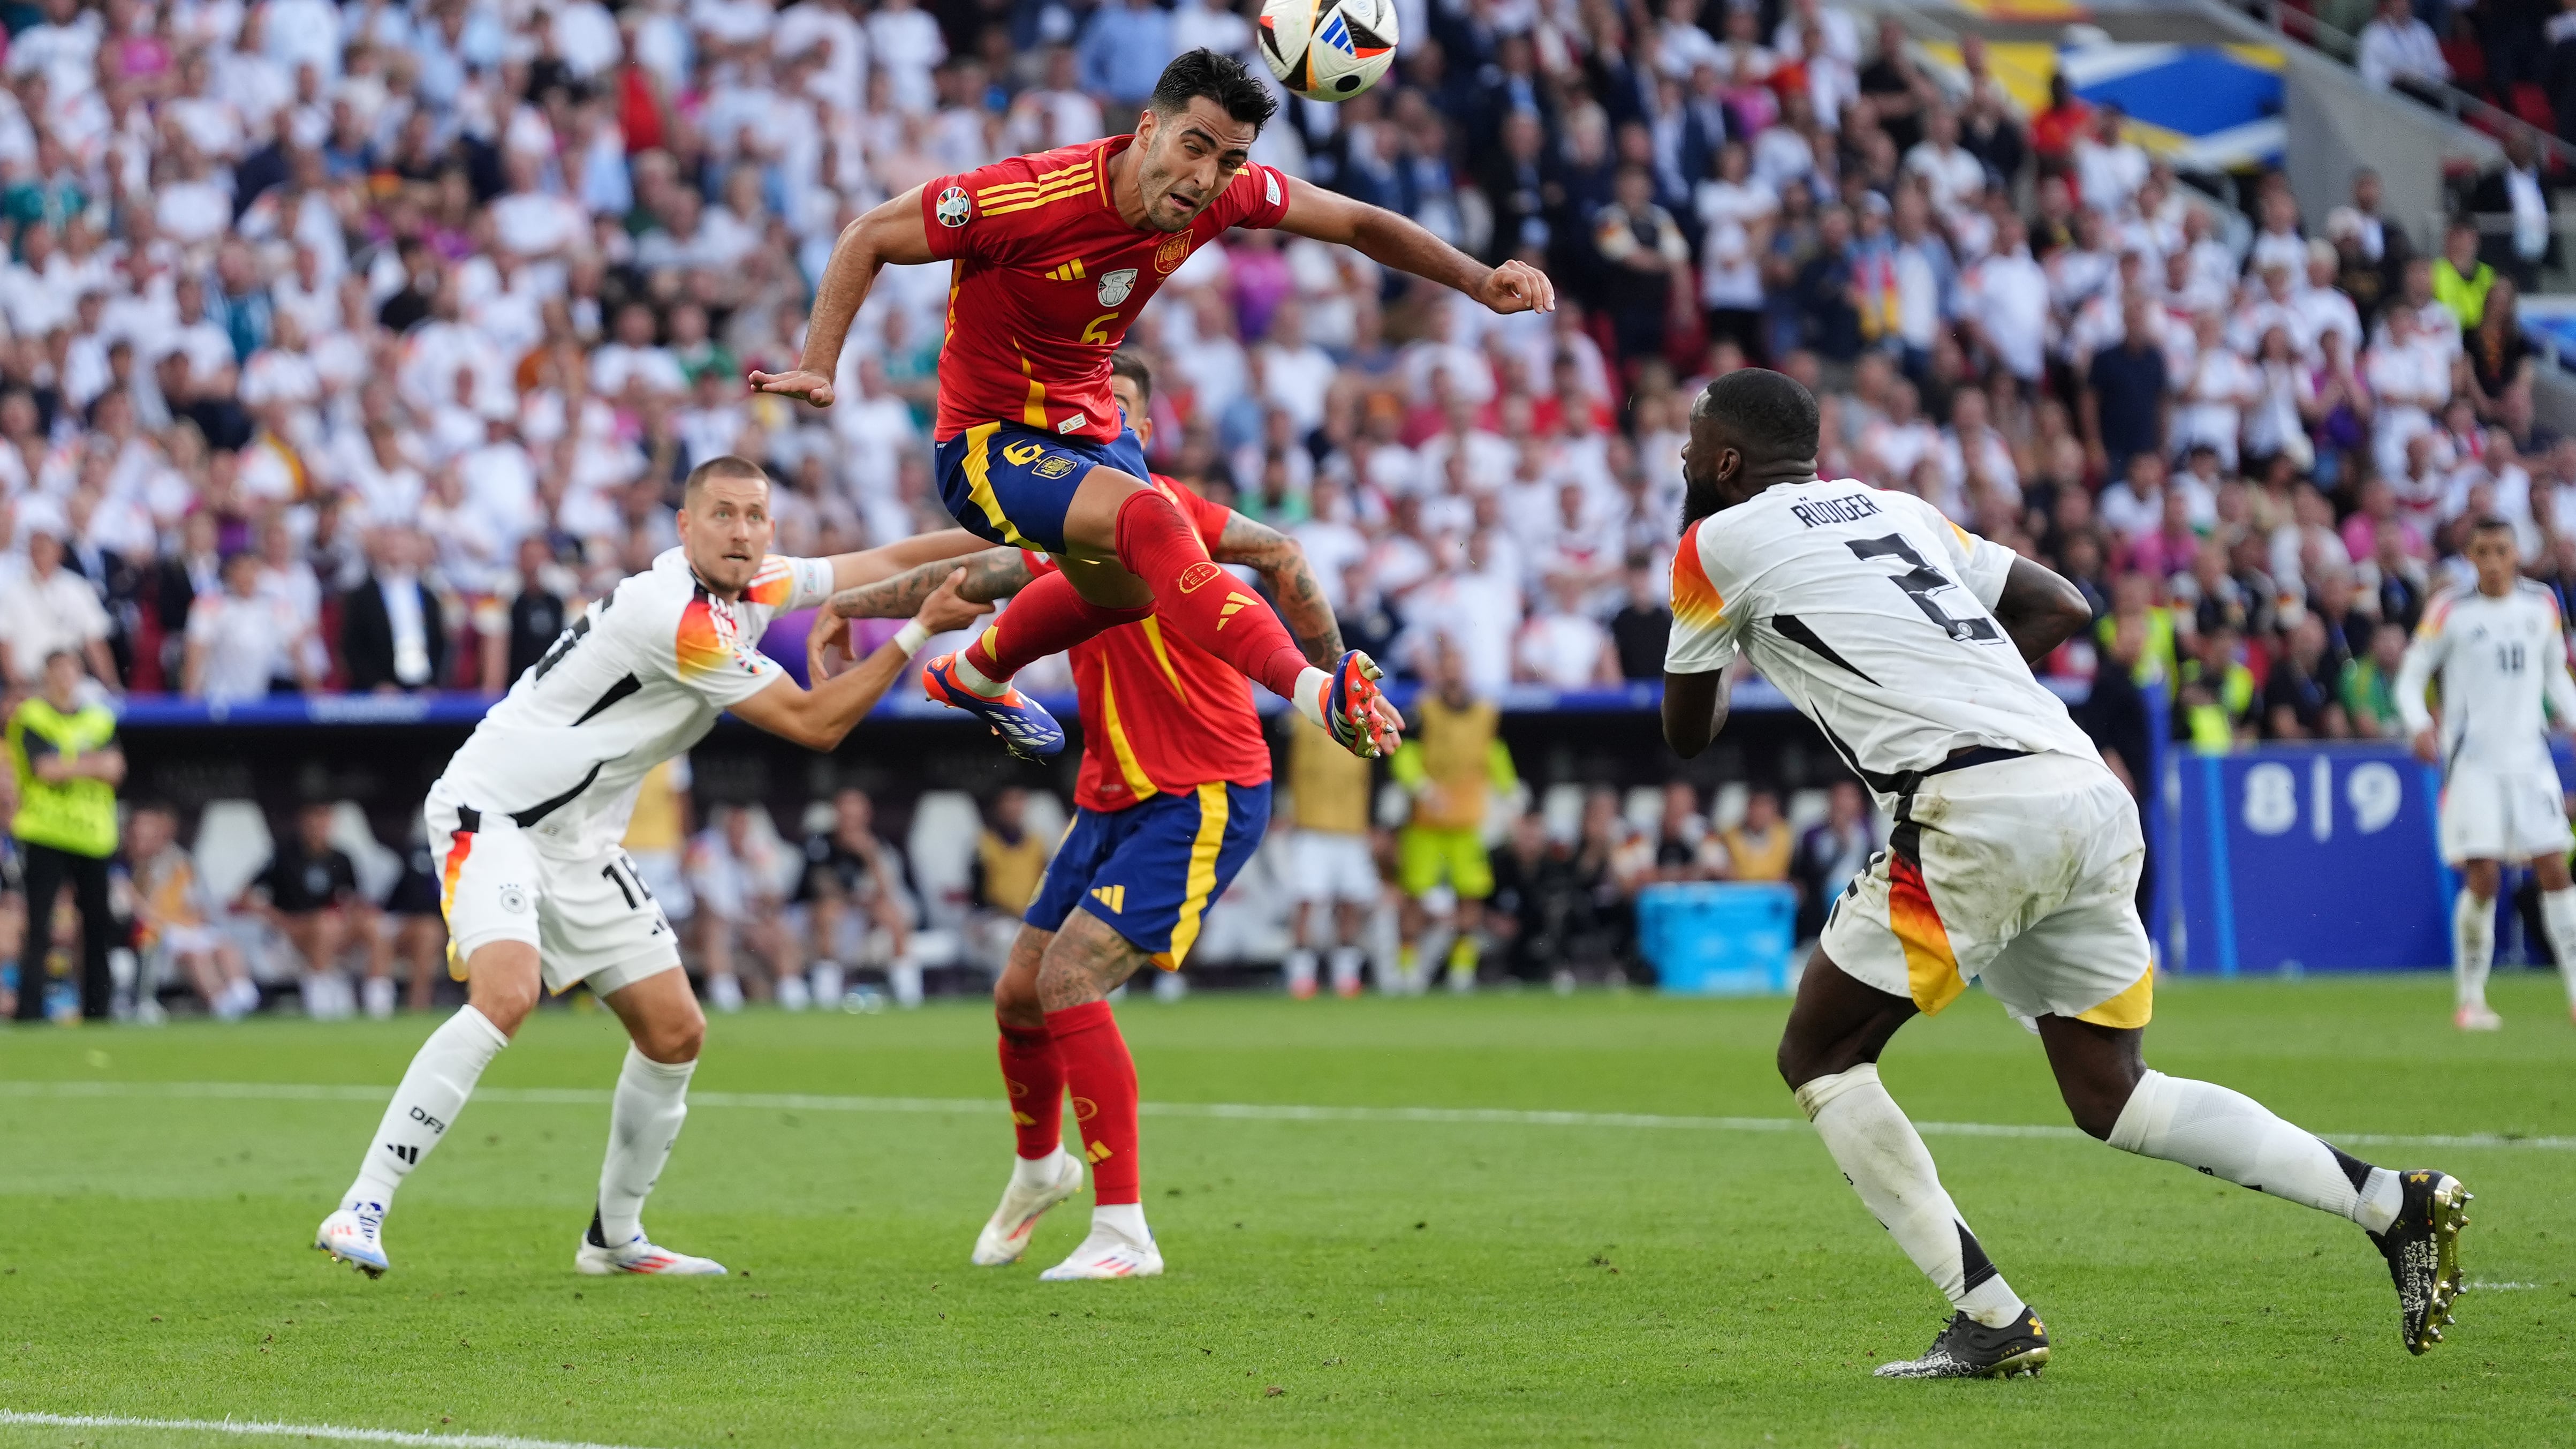 Mikel Merino scored the winner for Spain to beat Germany 2-1